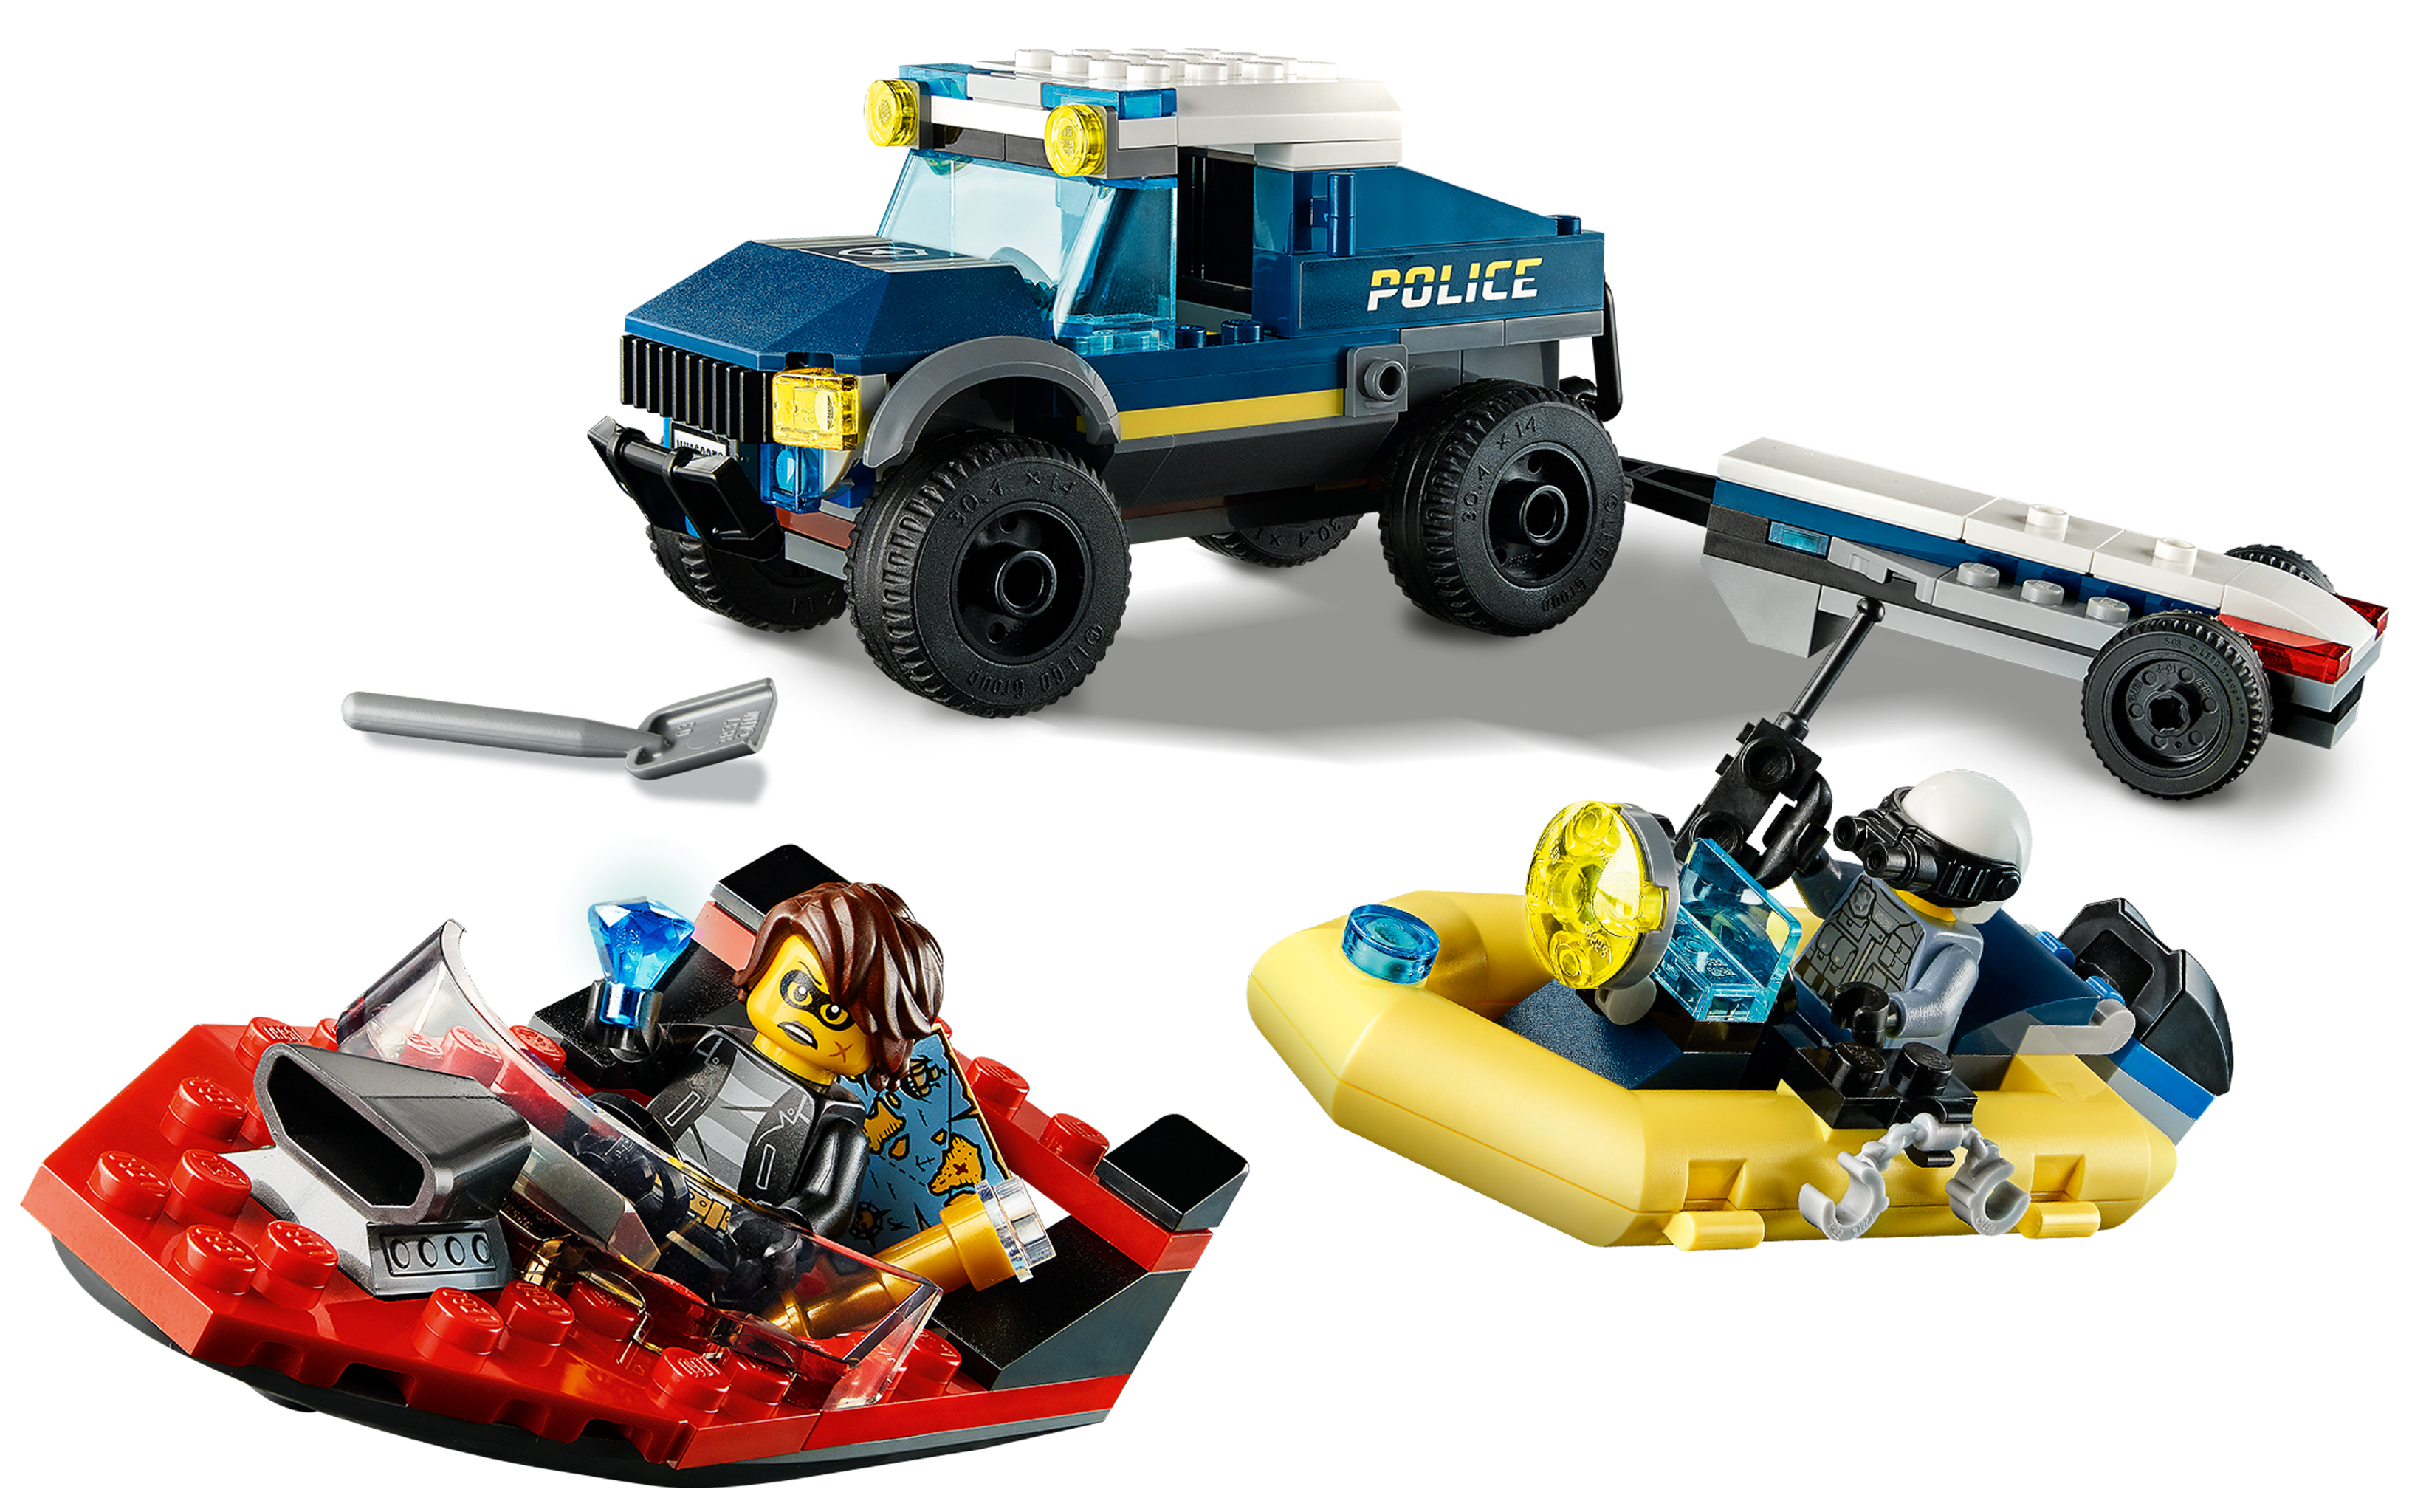 Lego City 60272 Police Boat Transport   New Lego in box ideal Gift